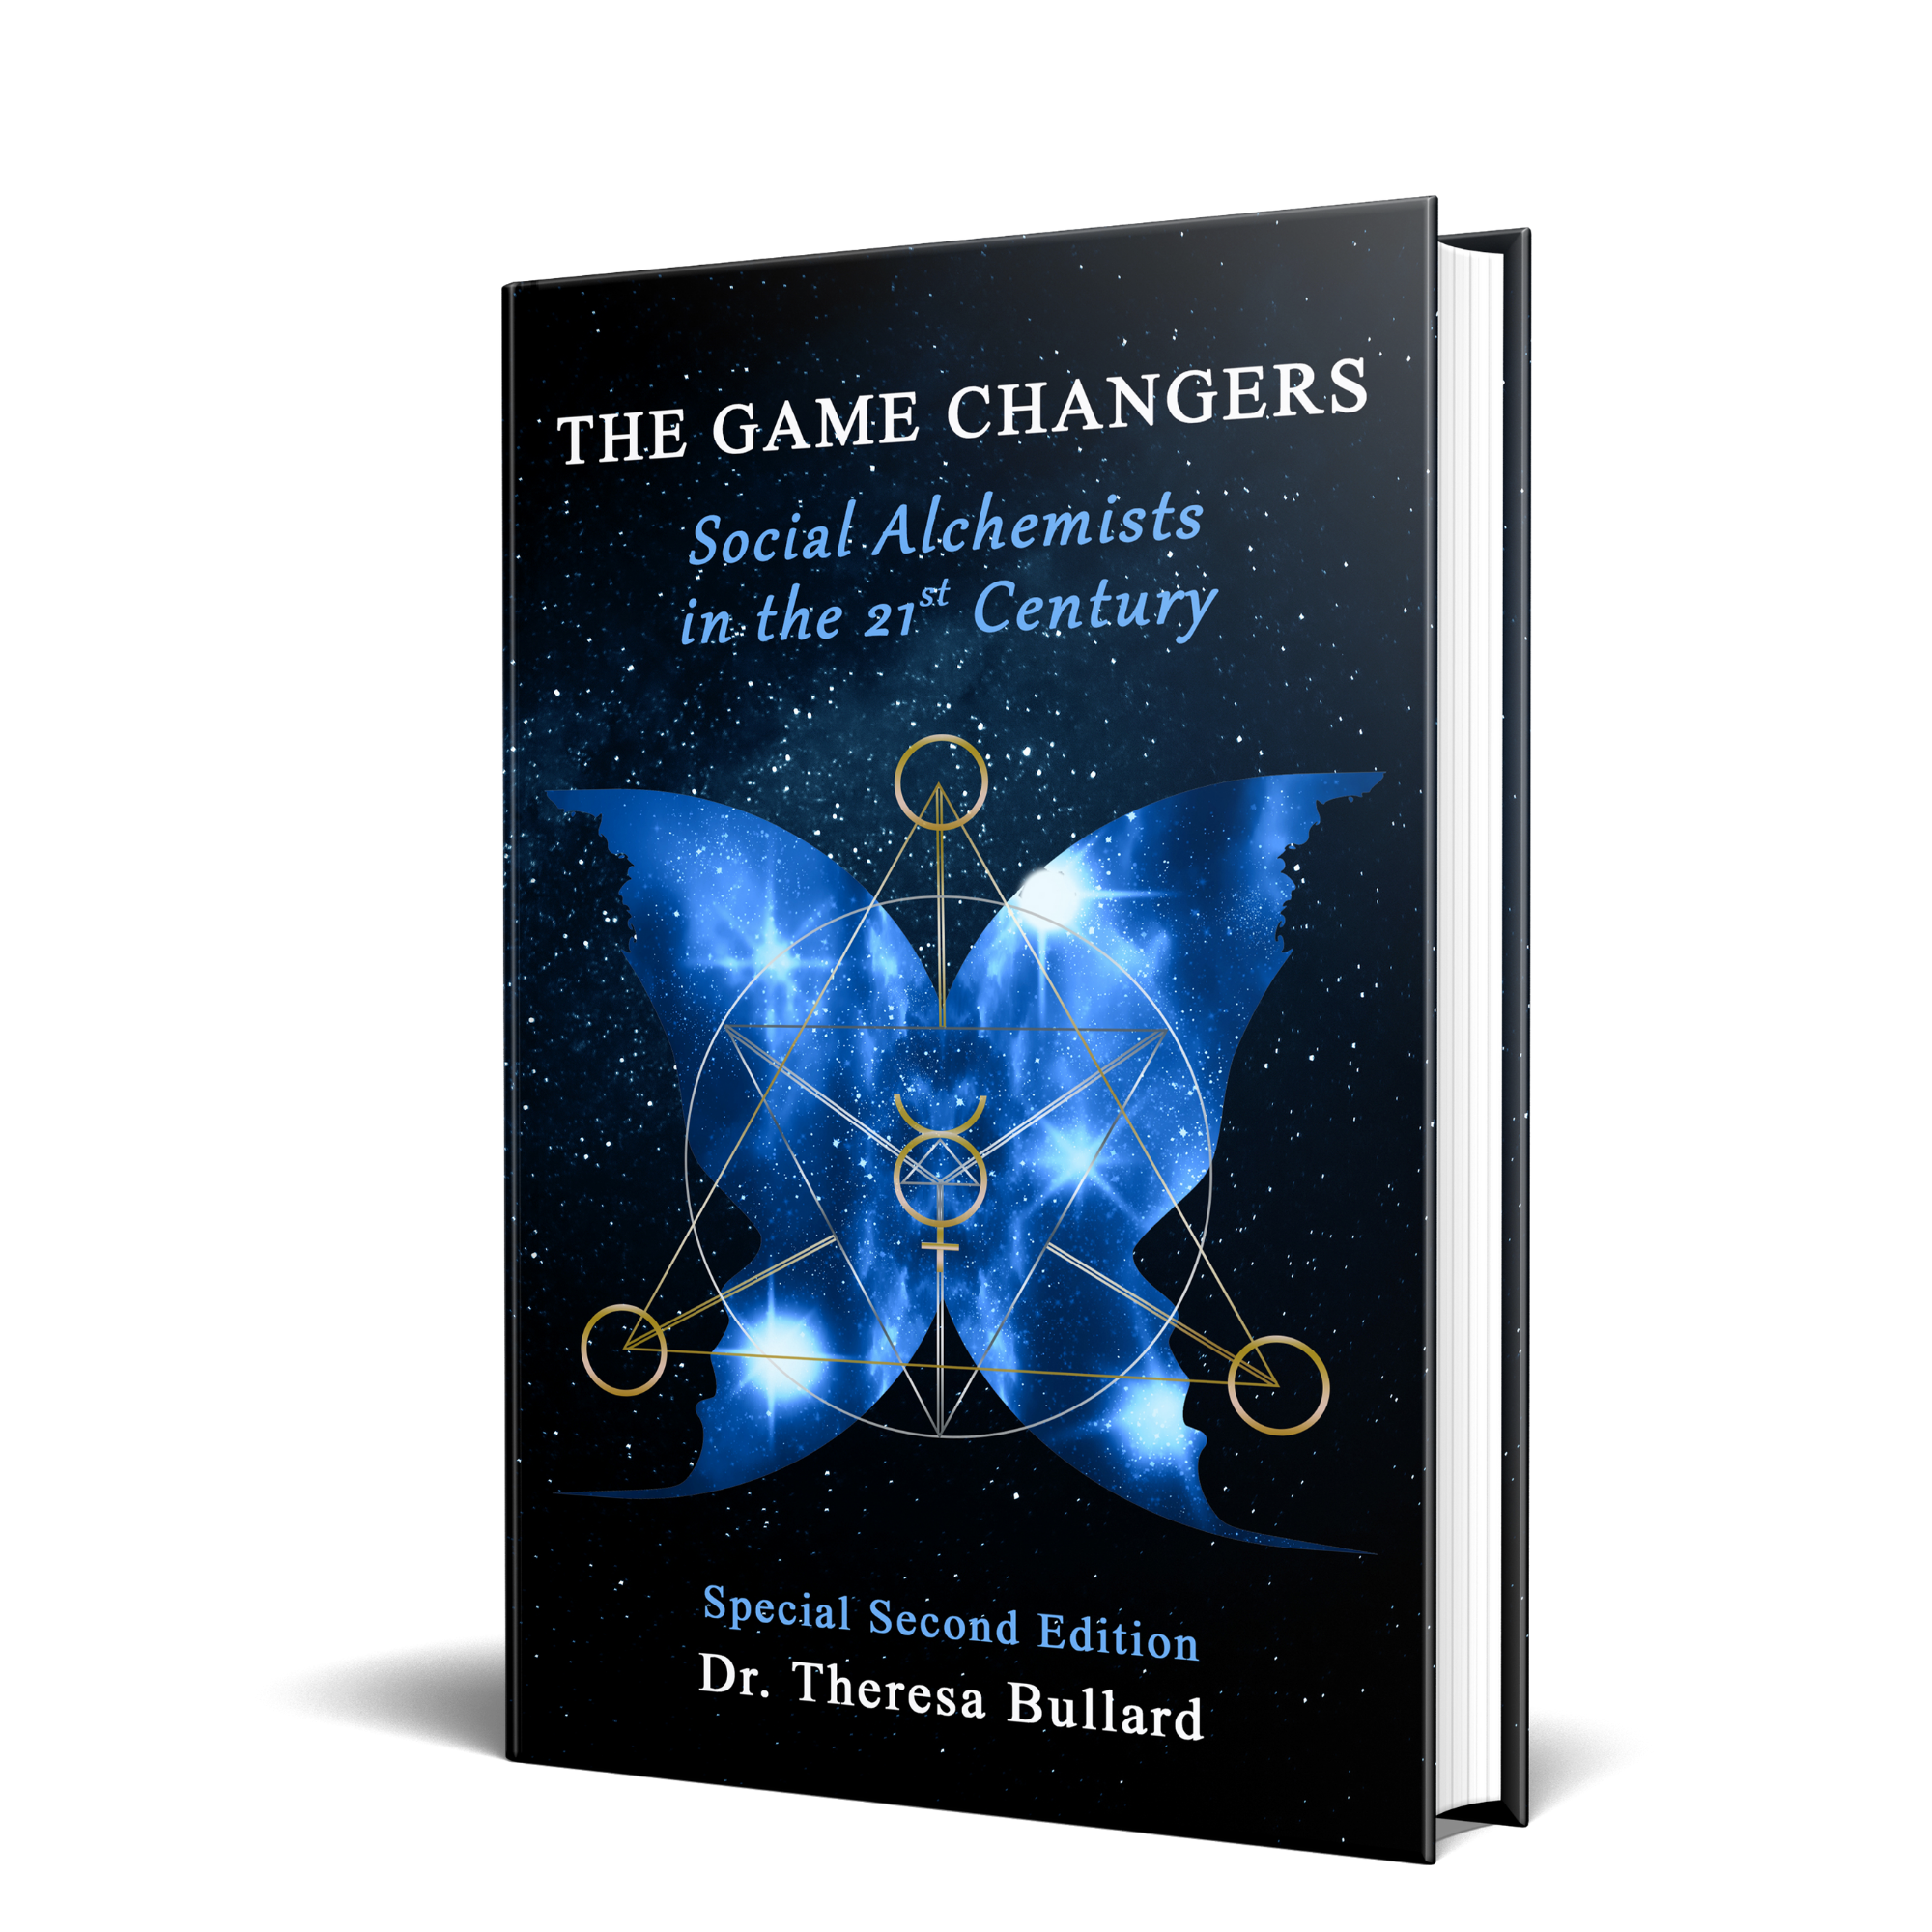 The Game Changers, Dr. Theresa